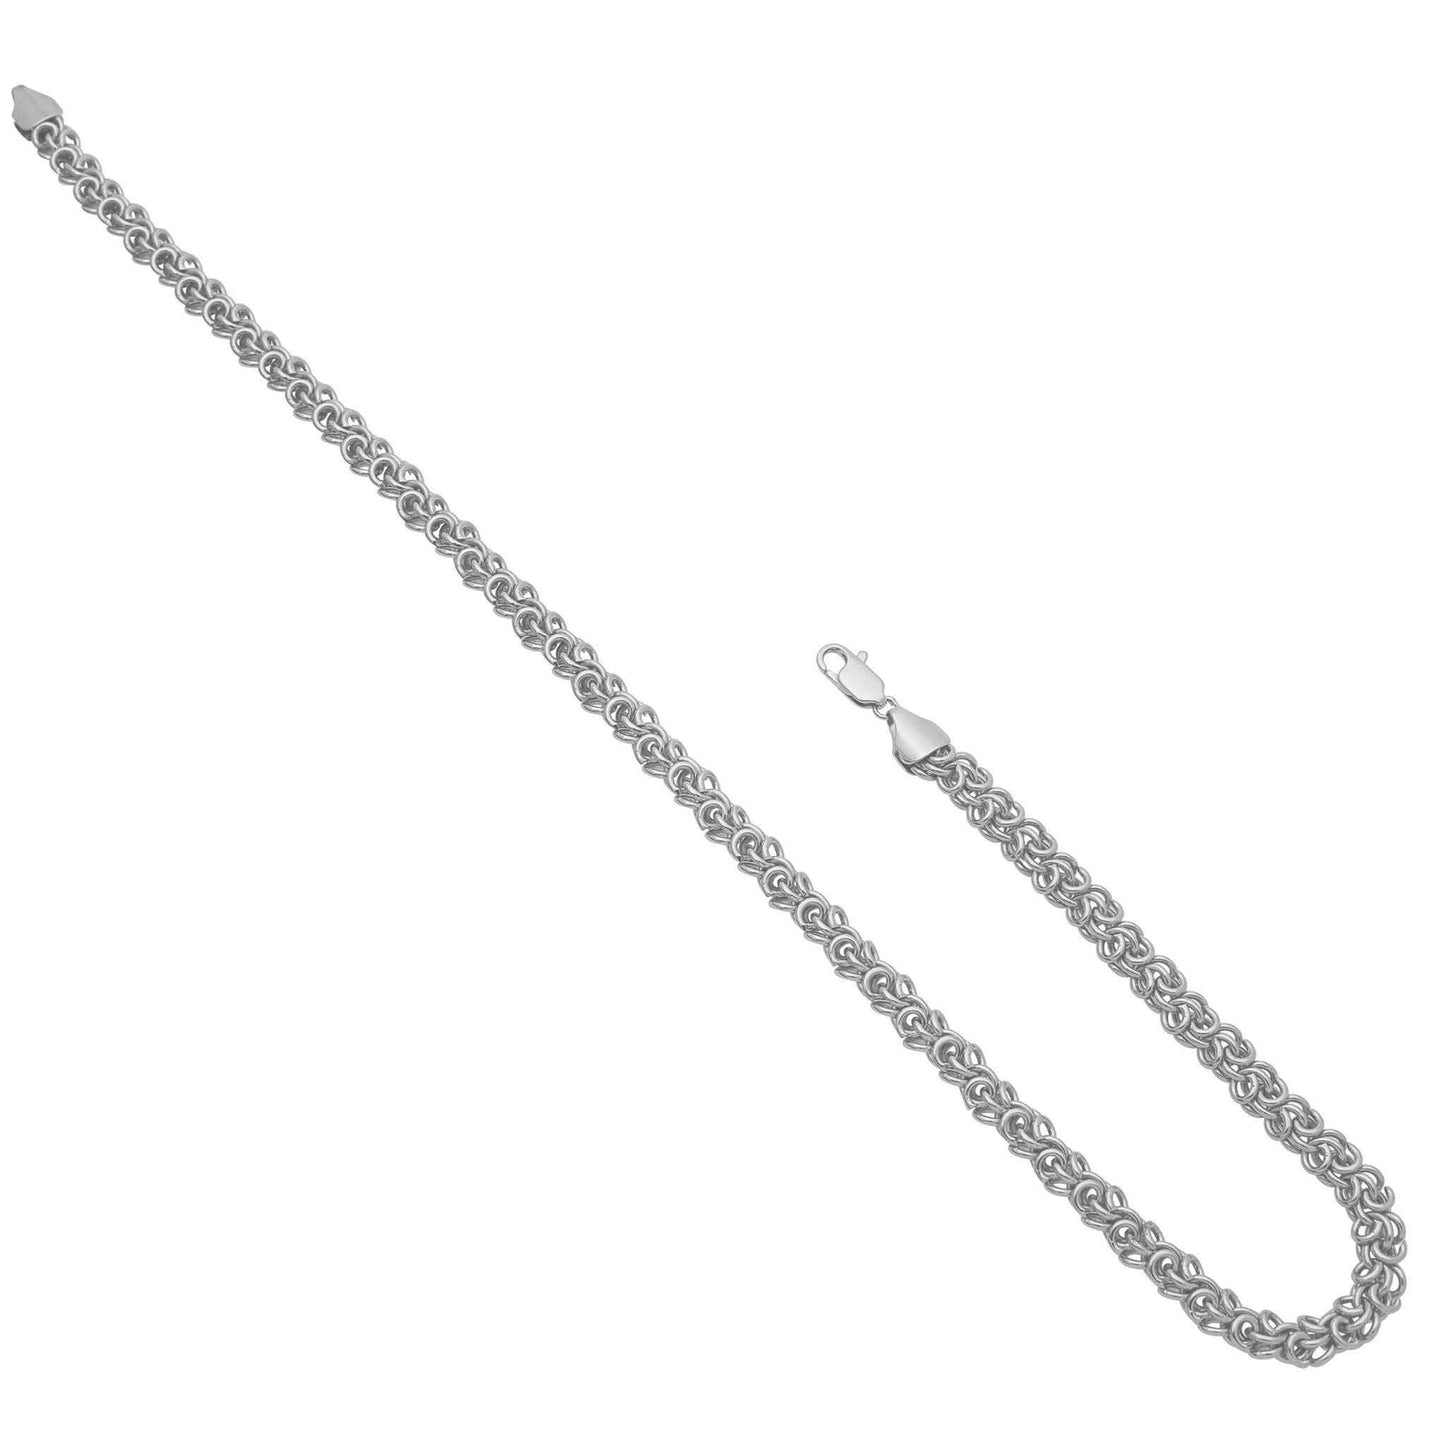 A 16" arabesque chain displayed on a neutral white background.